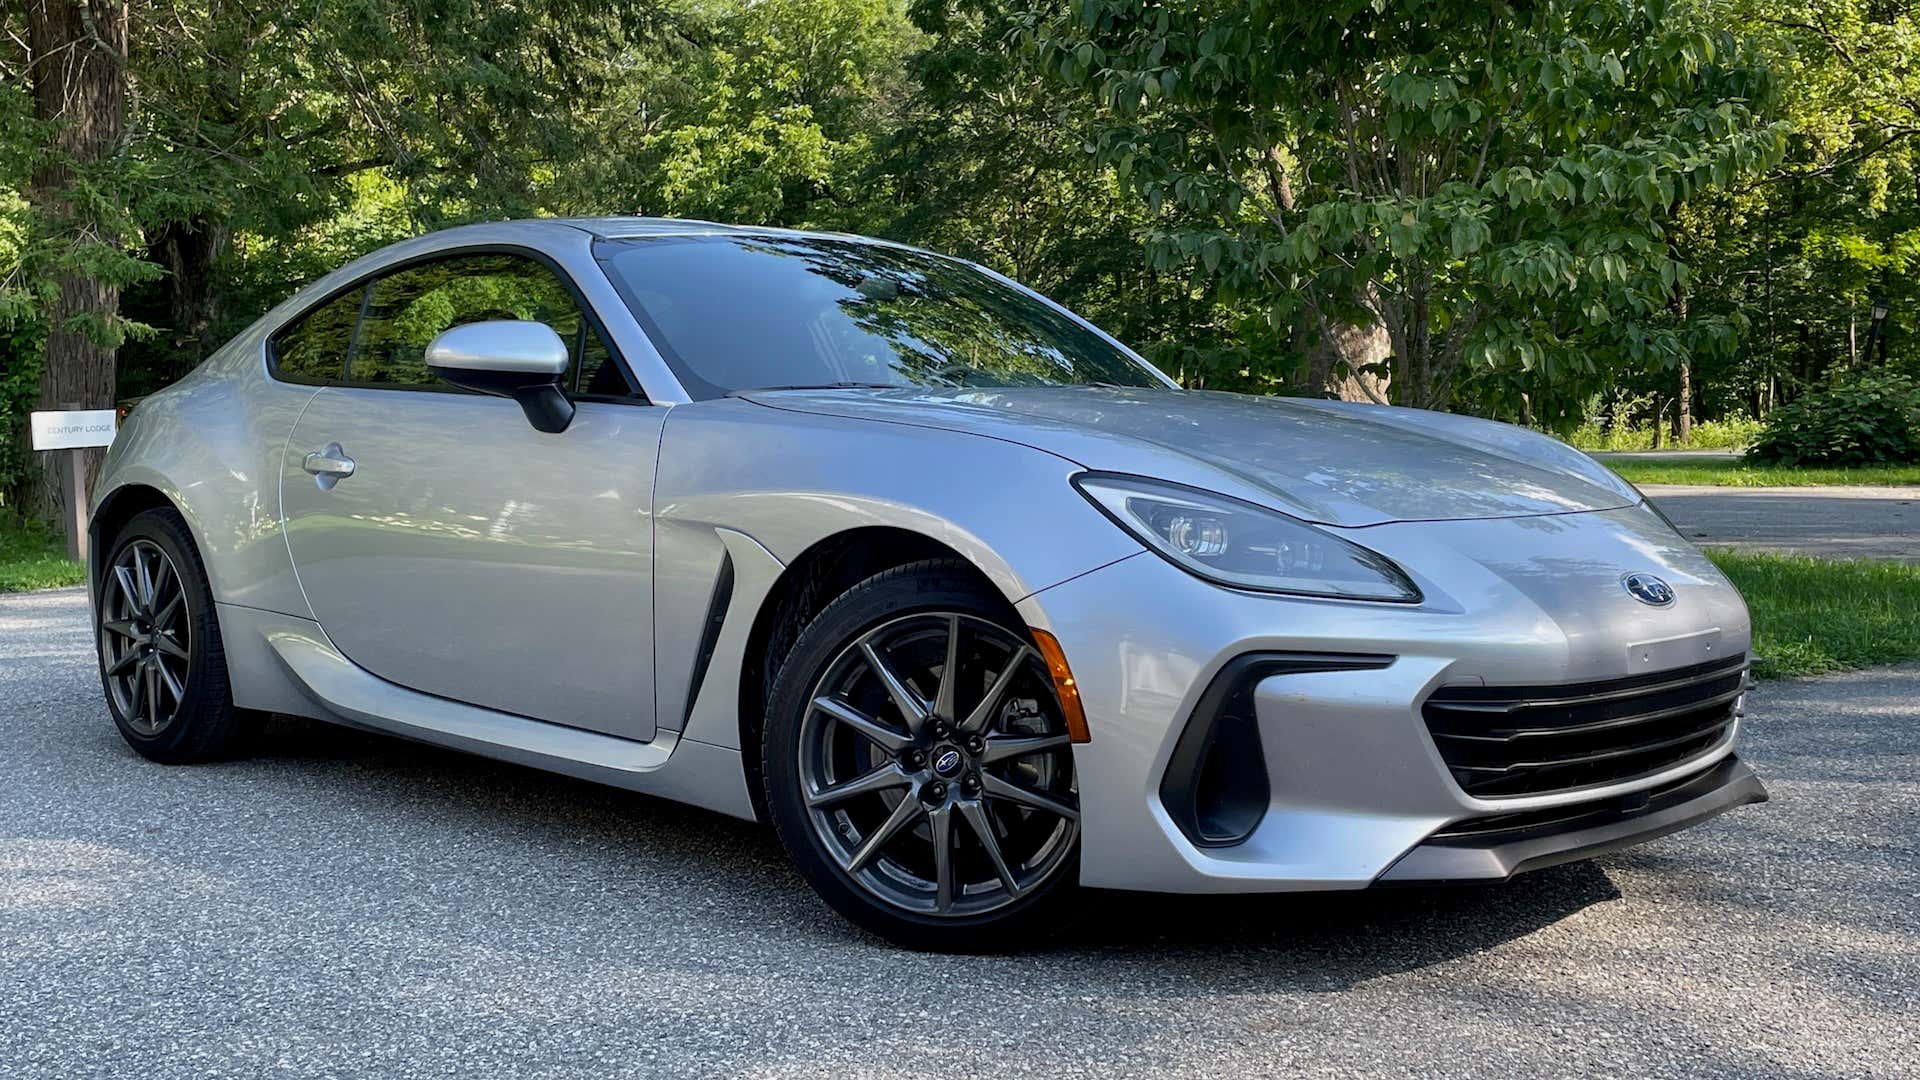 2022 Subaru BRZ First Drive Review: Yep, the Old BRZ Needed More Power